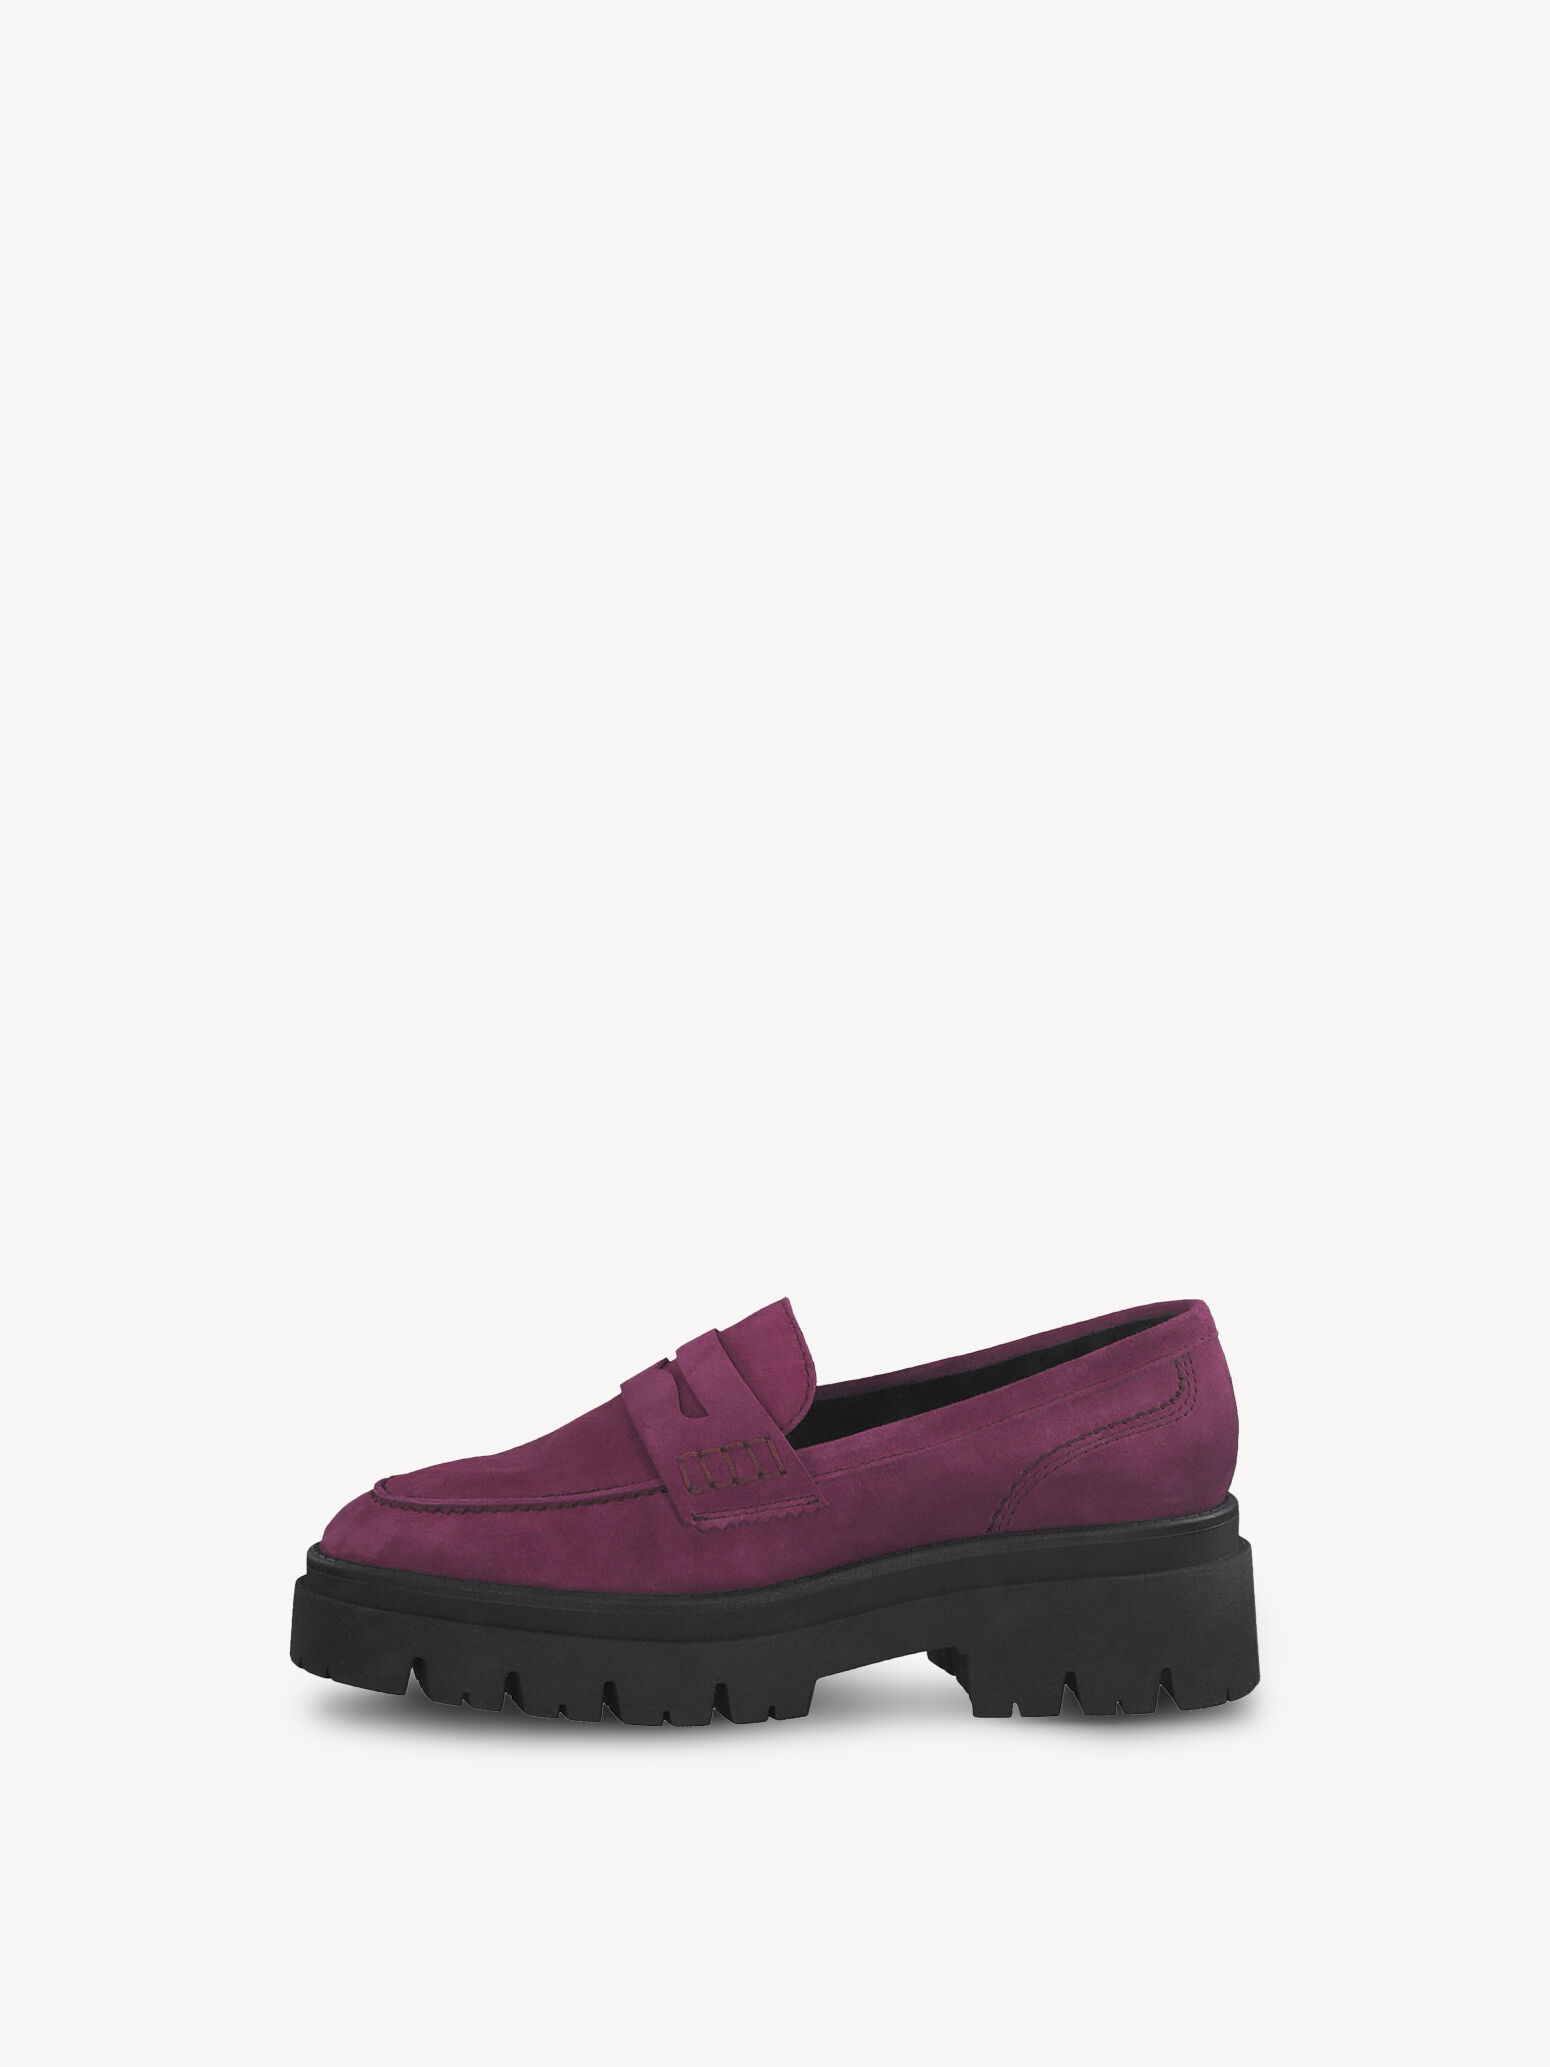 Chaussures Chaussures basses Slips-on Tamaris Slip-on rouge-rouge fonc\u00e9 style extravagant 